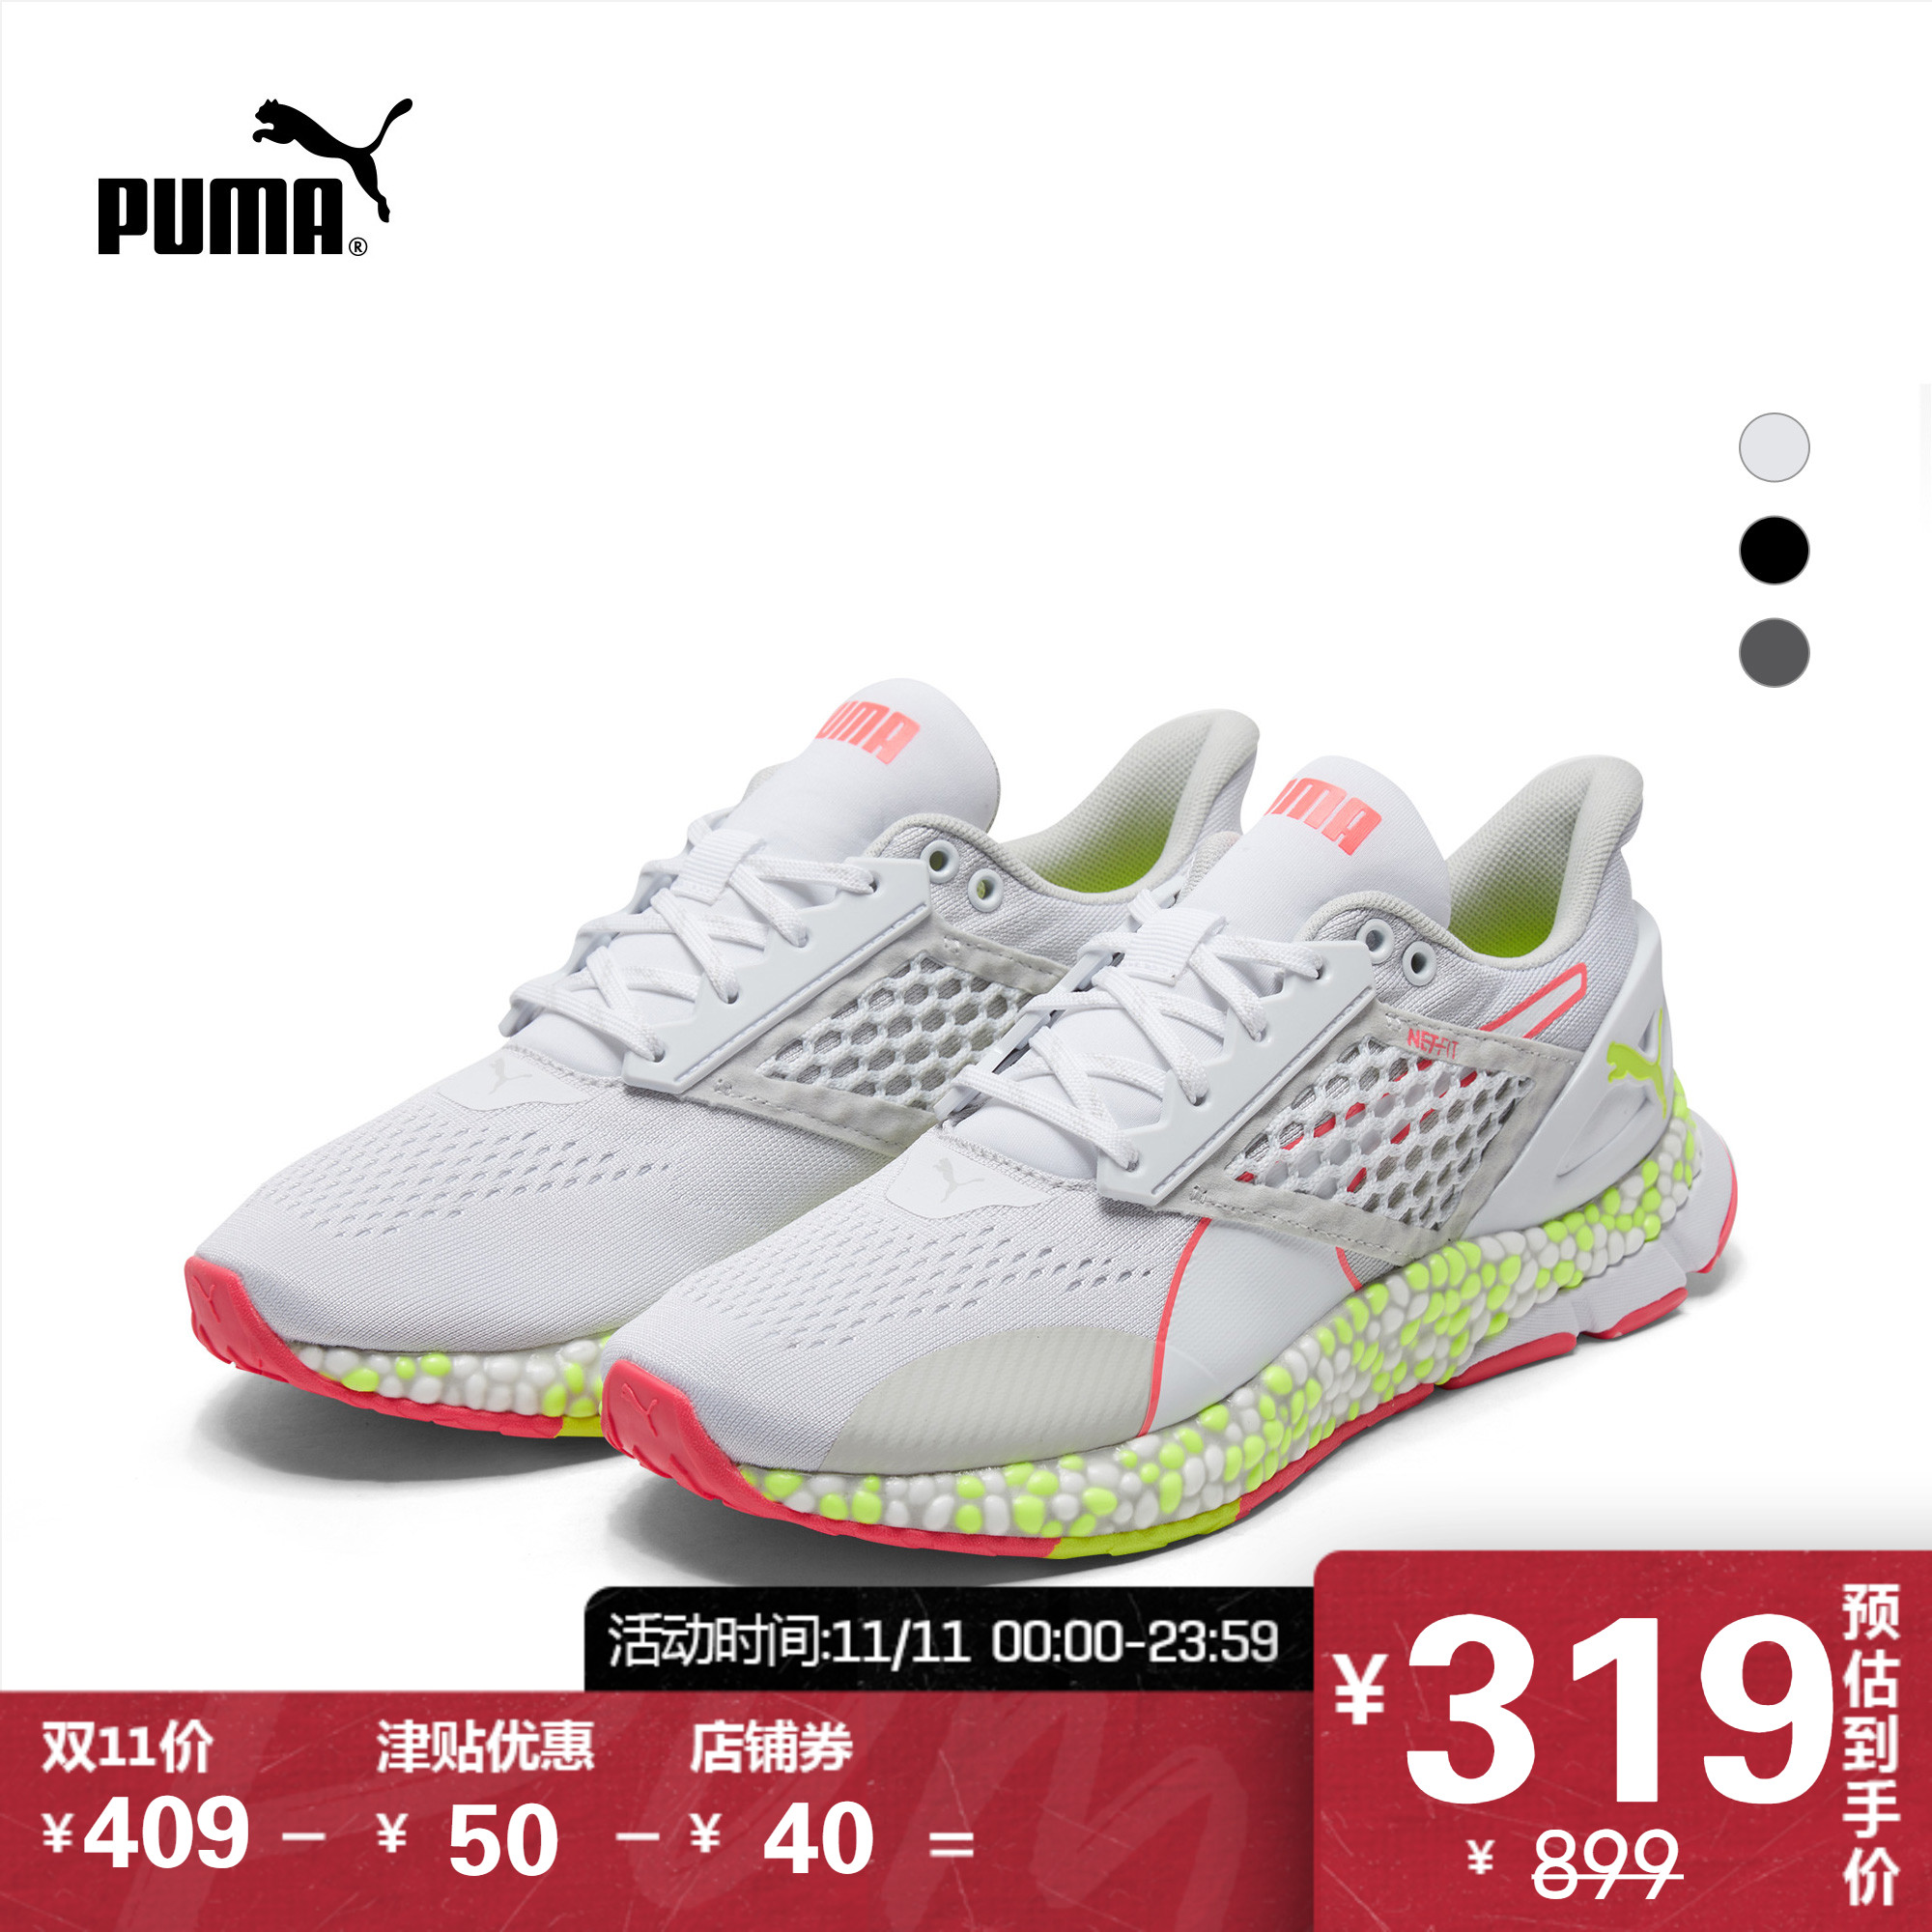 PUMA Puma Official Authentic New Women's Cushioned Running Shoe HYBRID ASTRO 192808